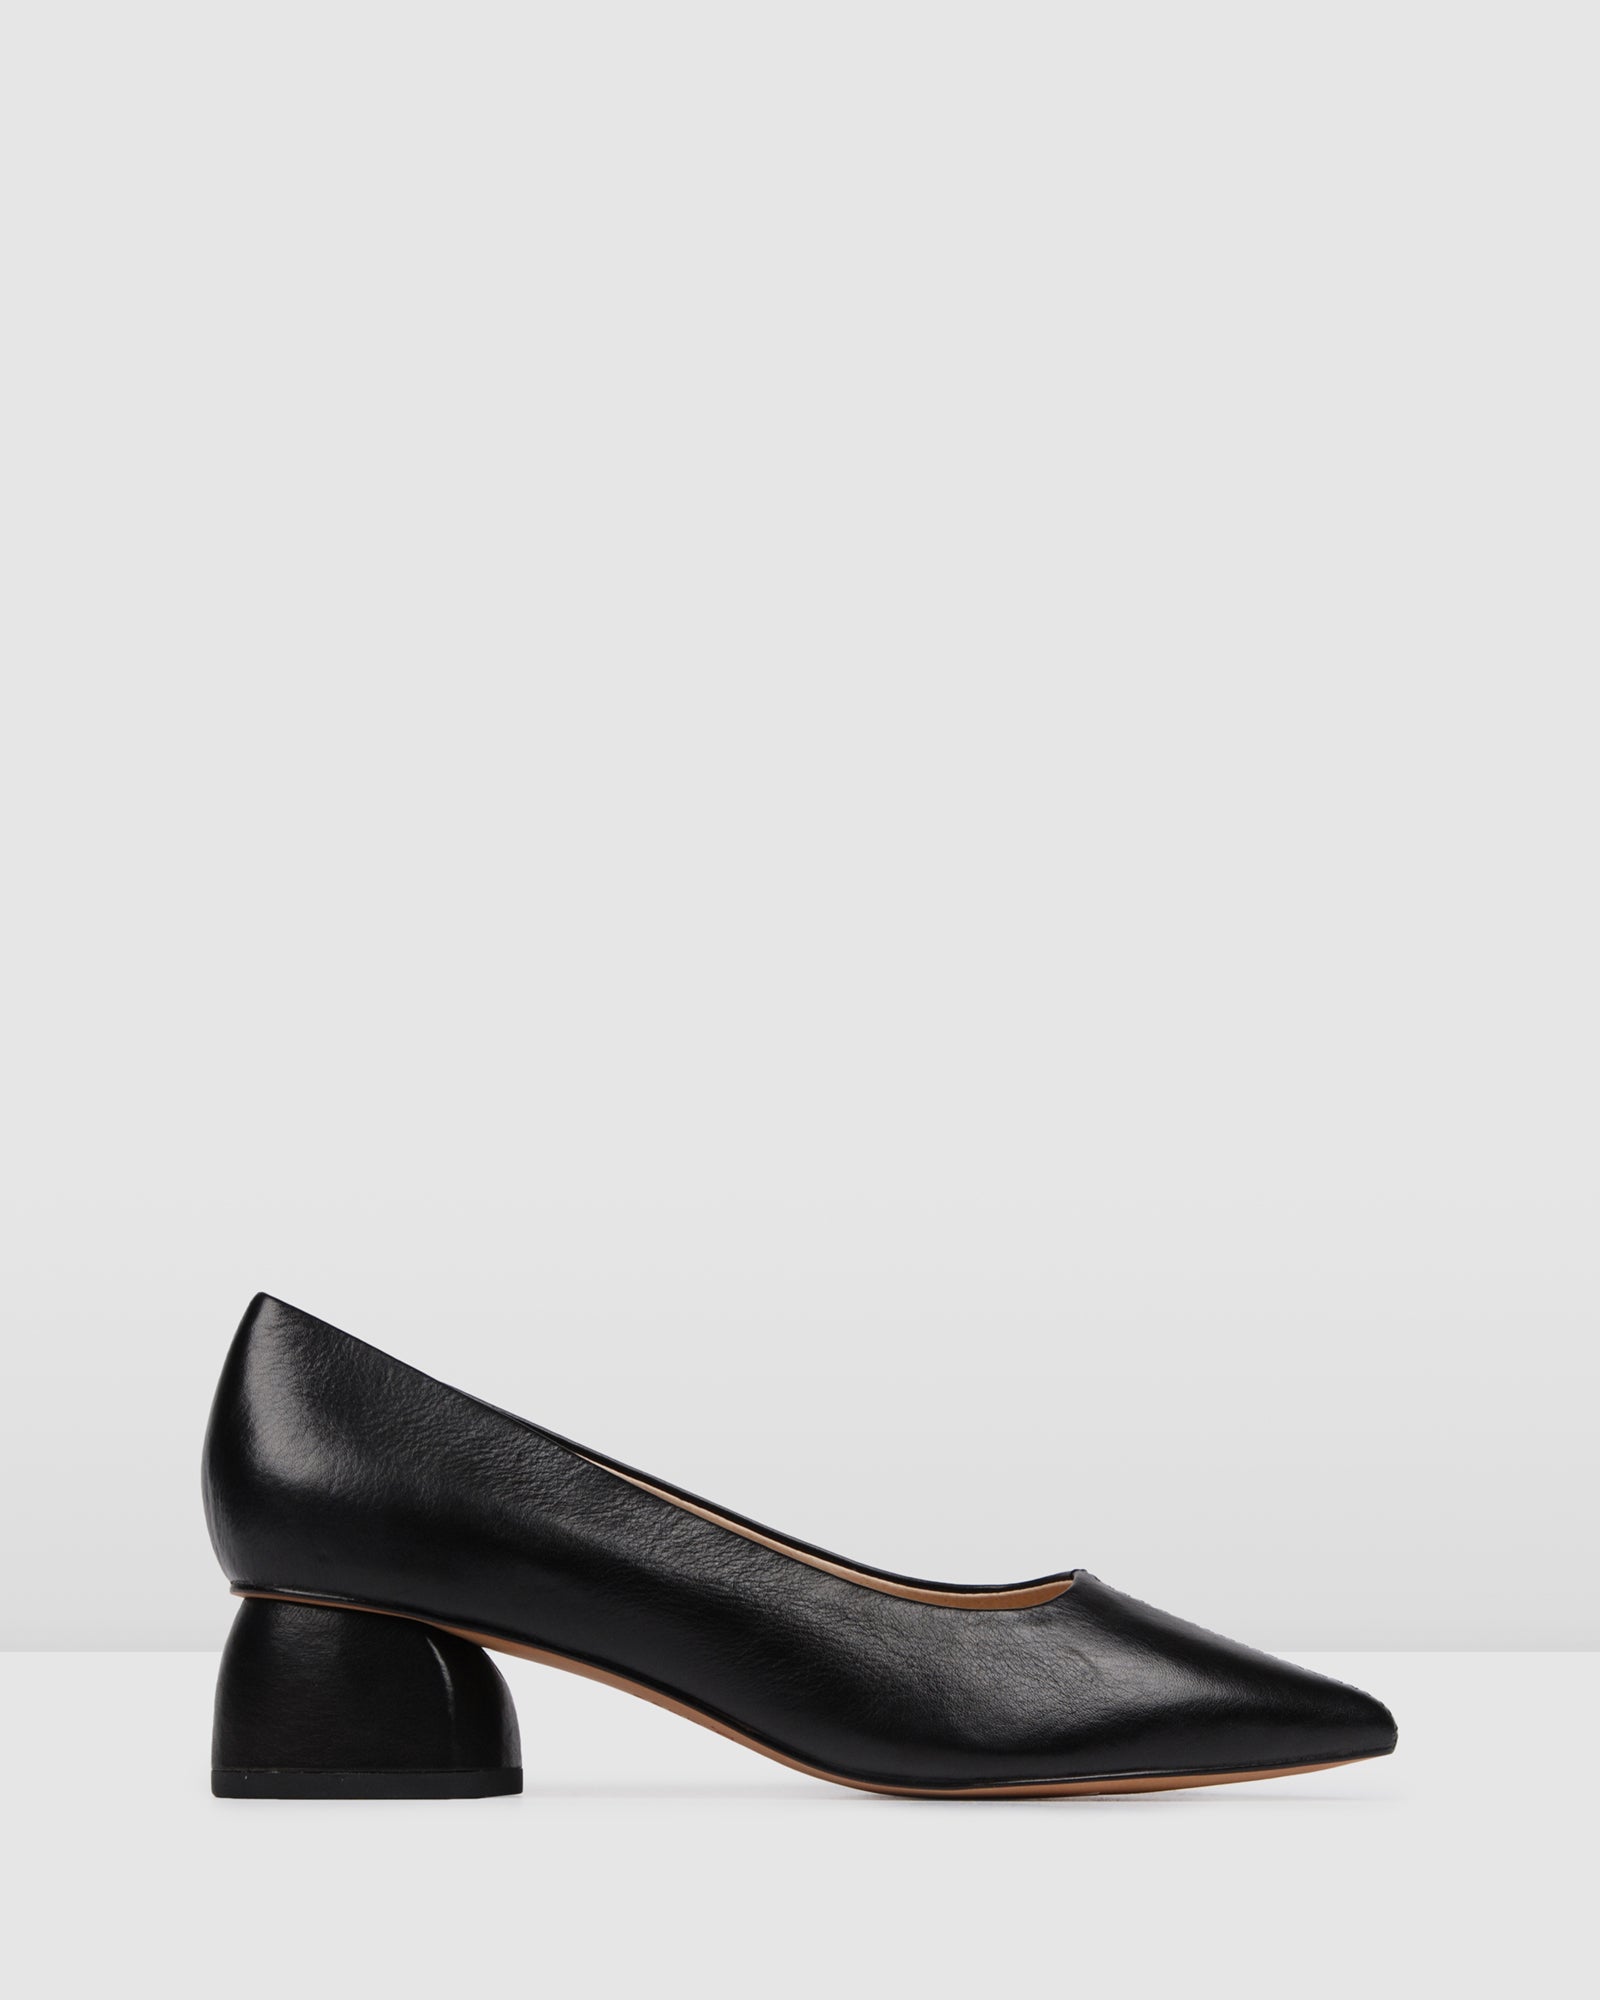 ABSTRACT LOW HEELS BLACK LEATHER - Jo 